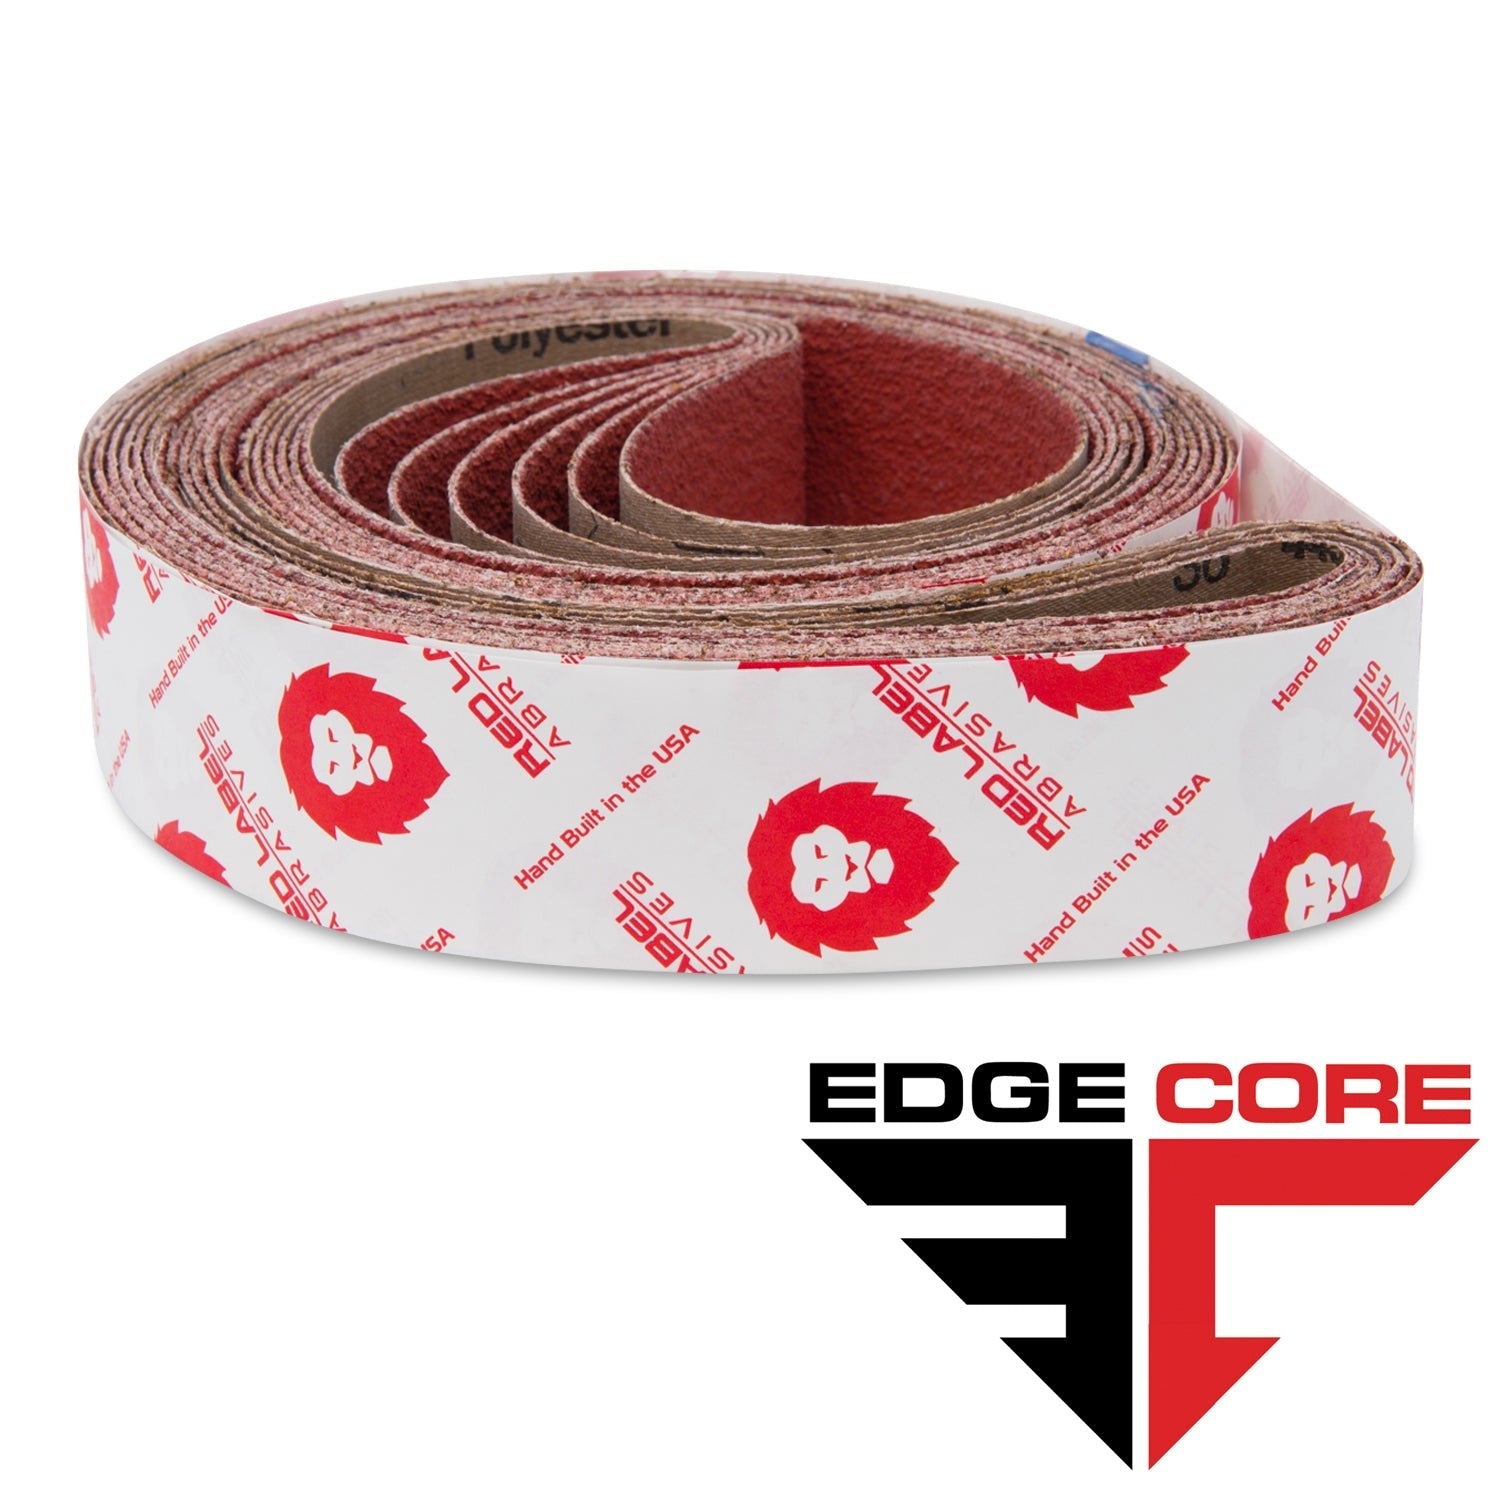 2 X 42 Inch EdgeCore Ceramic Grinding Belts, 6 Pack - Red Label Abrasives